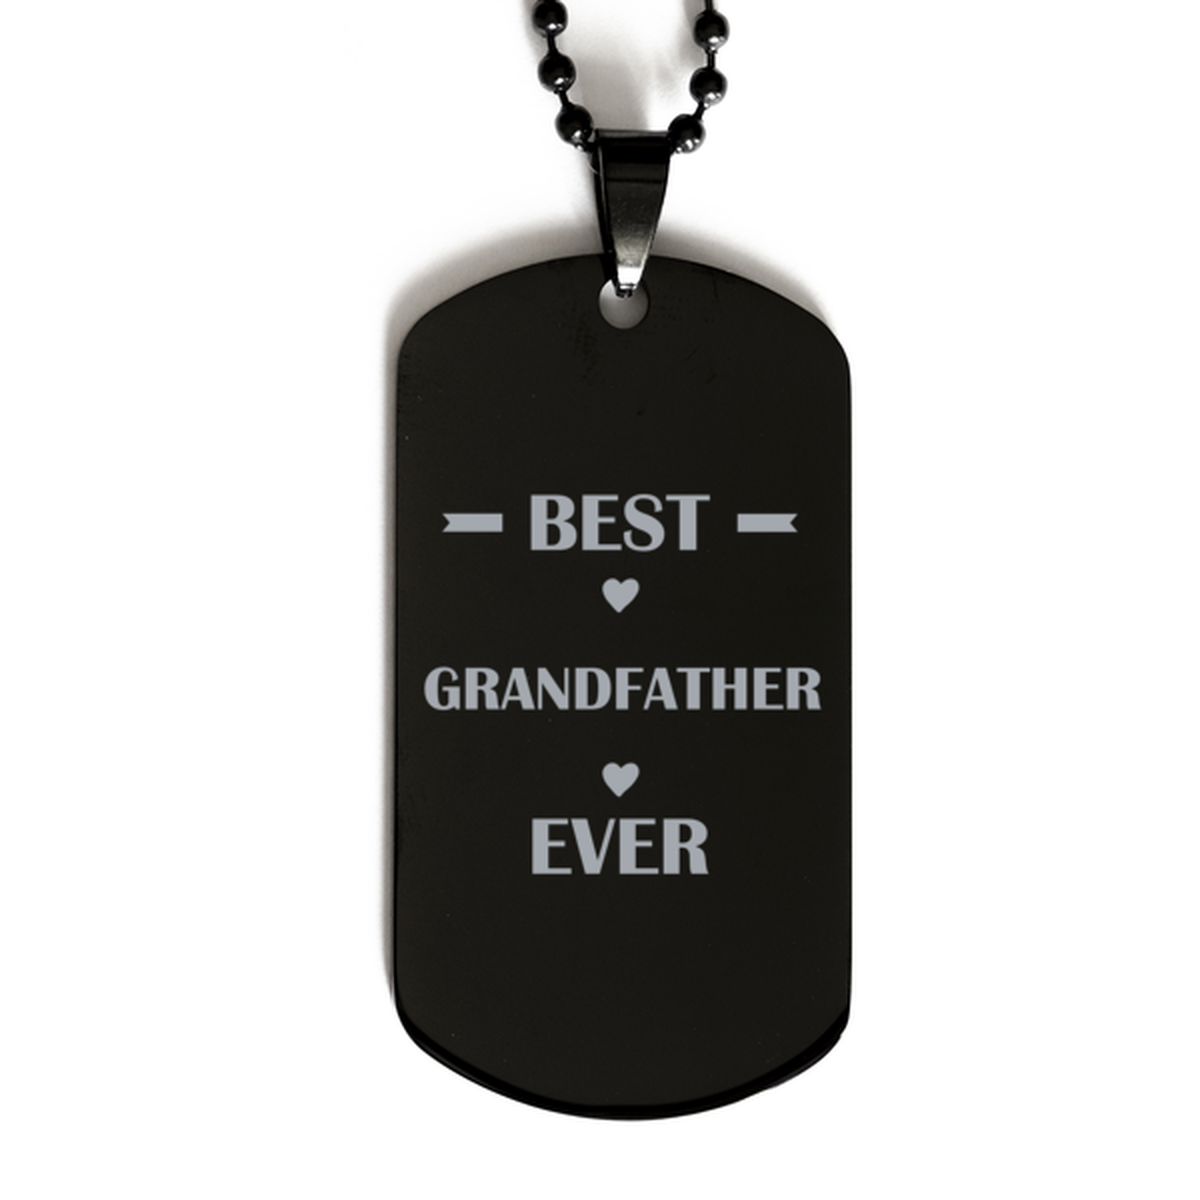 Best Grandfather Ever Grandfather Gifts, Funny Black Dog Tag For Grandfather, Birthday Family Presents Engraved Necklace For Men